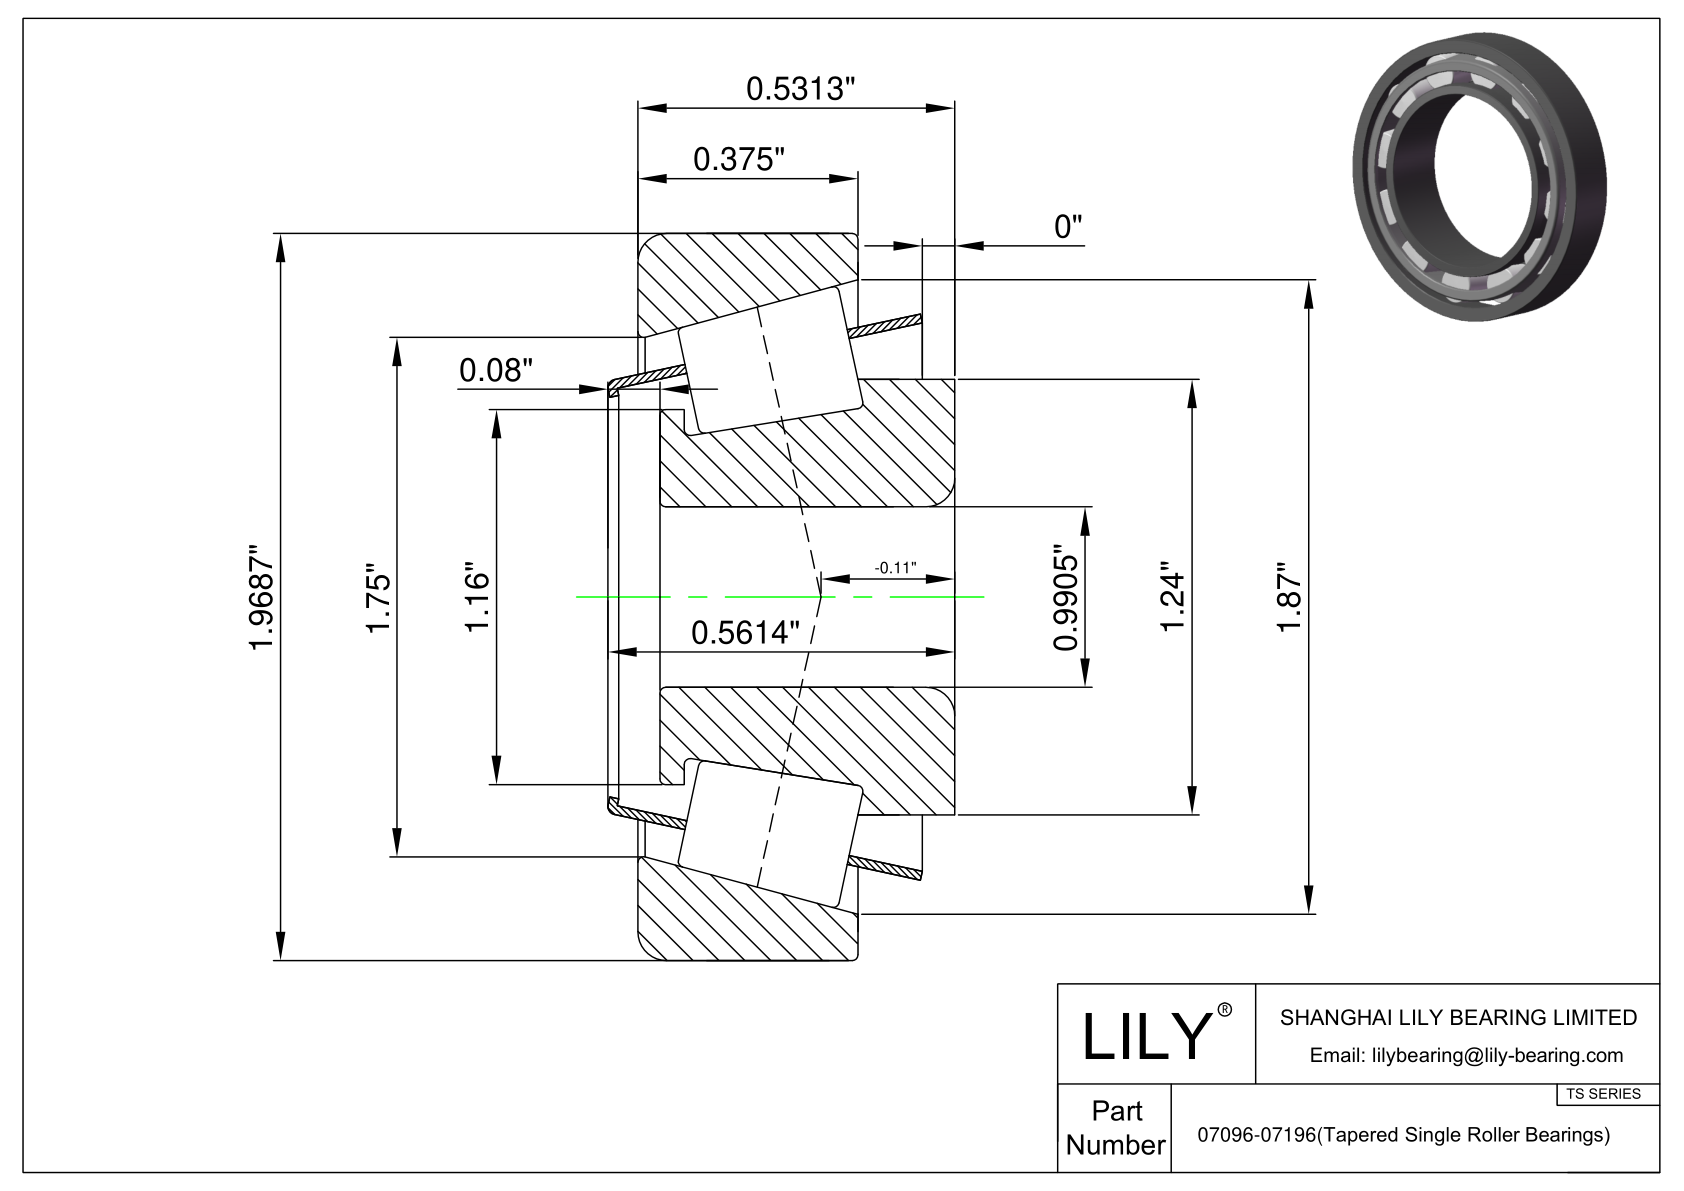 07096-07196 TS (Tapered Single Roller Bearings) (Imperial) cad drawing